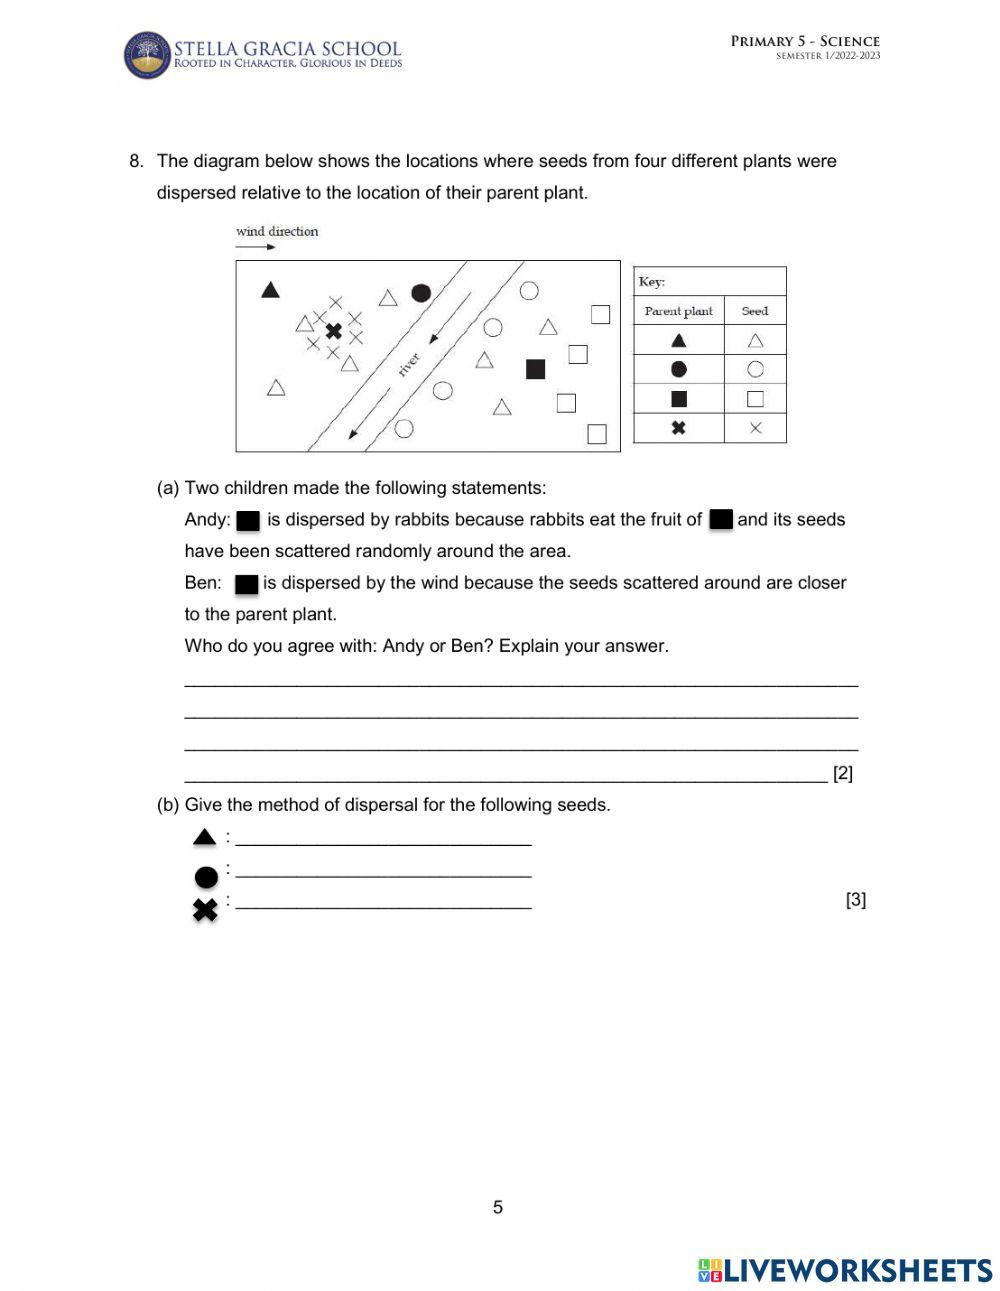 P5-Topical Test 1